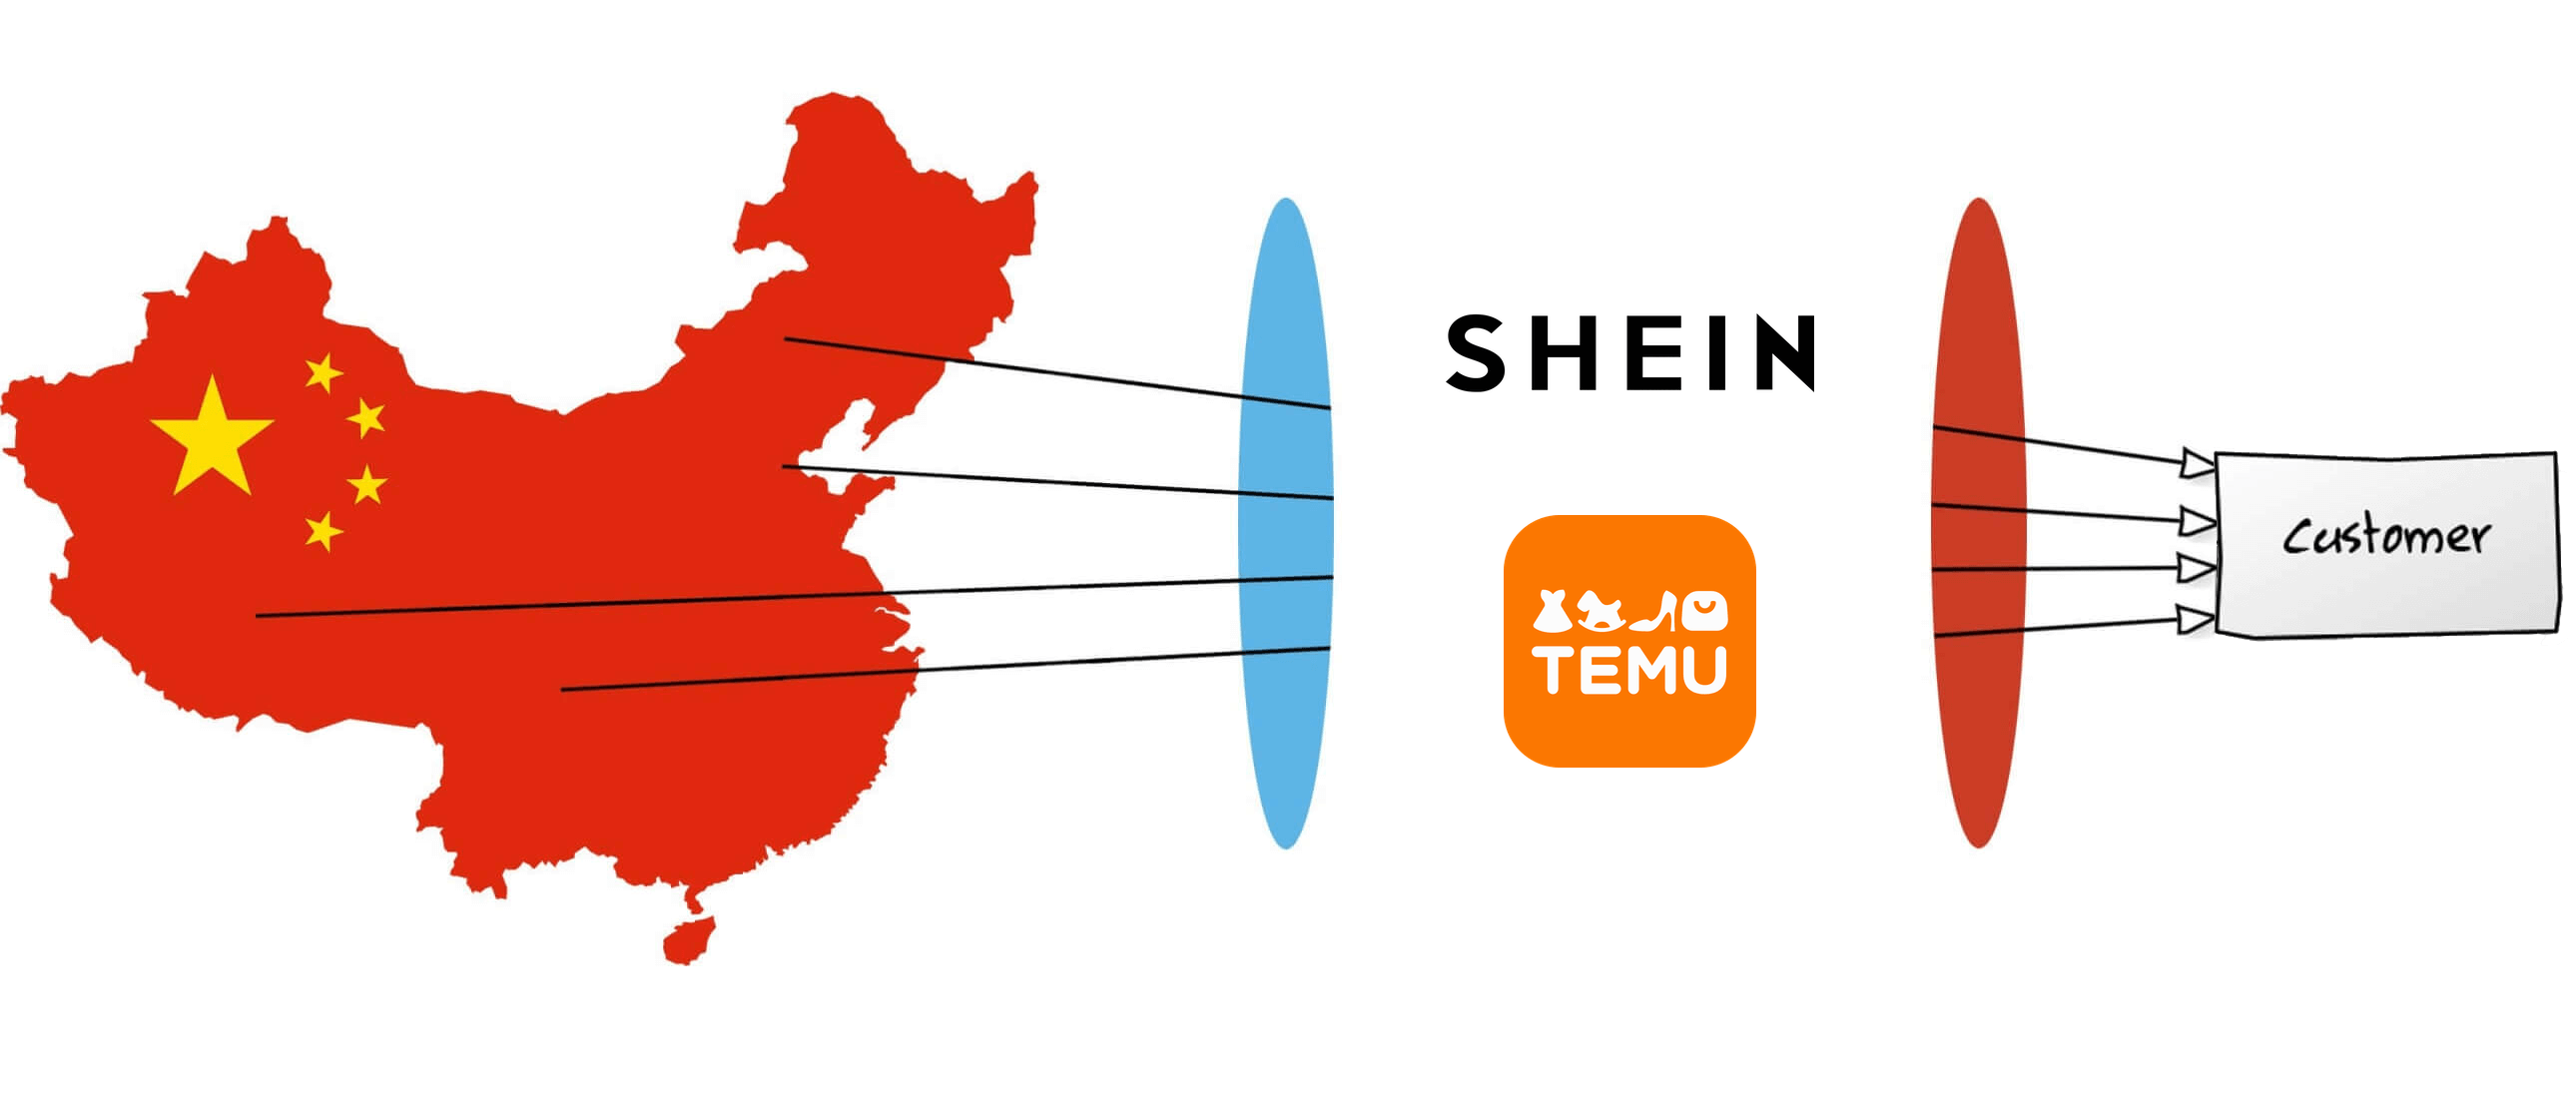 Shein and Temu direct to consumer from China